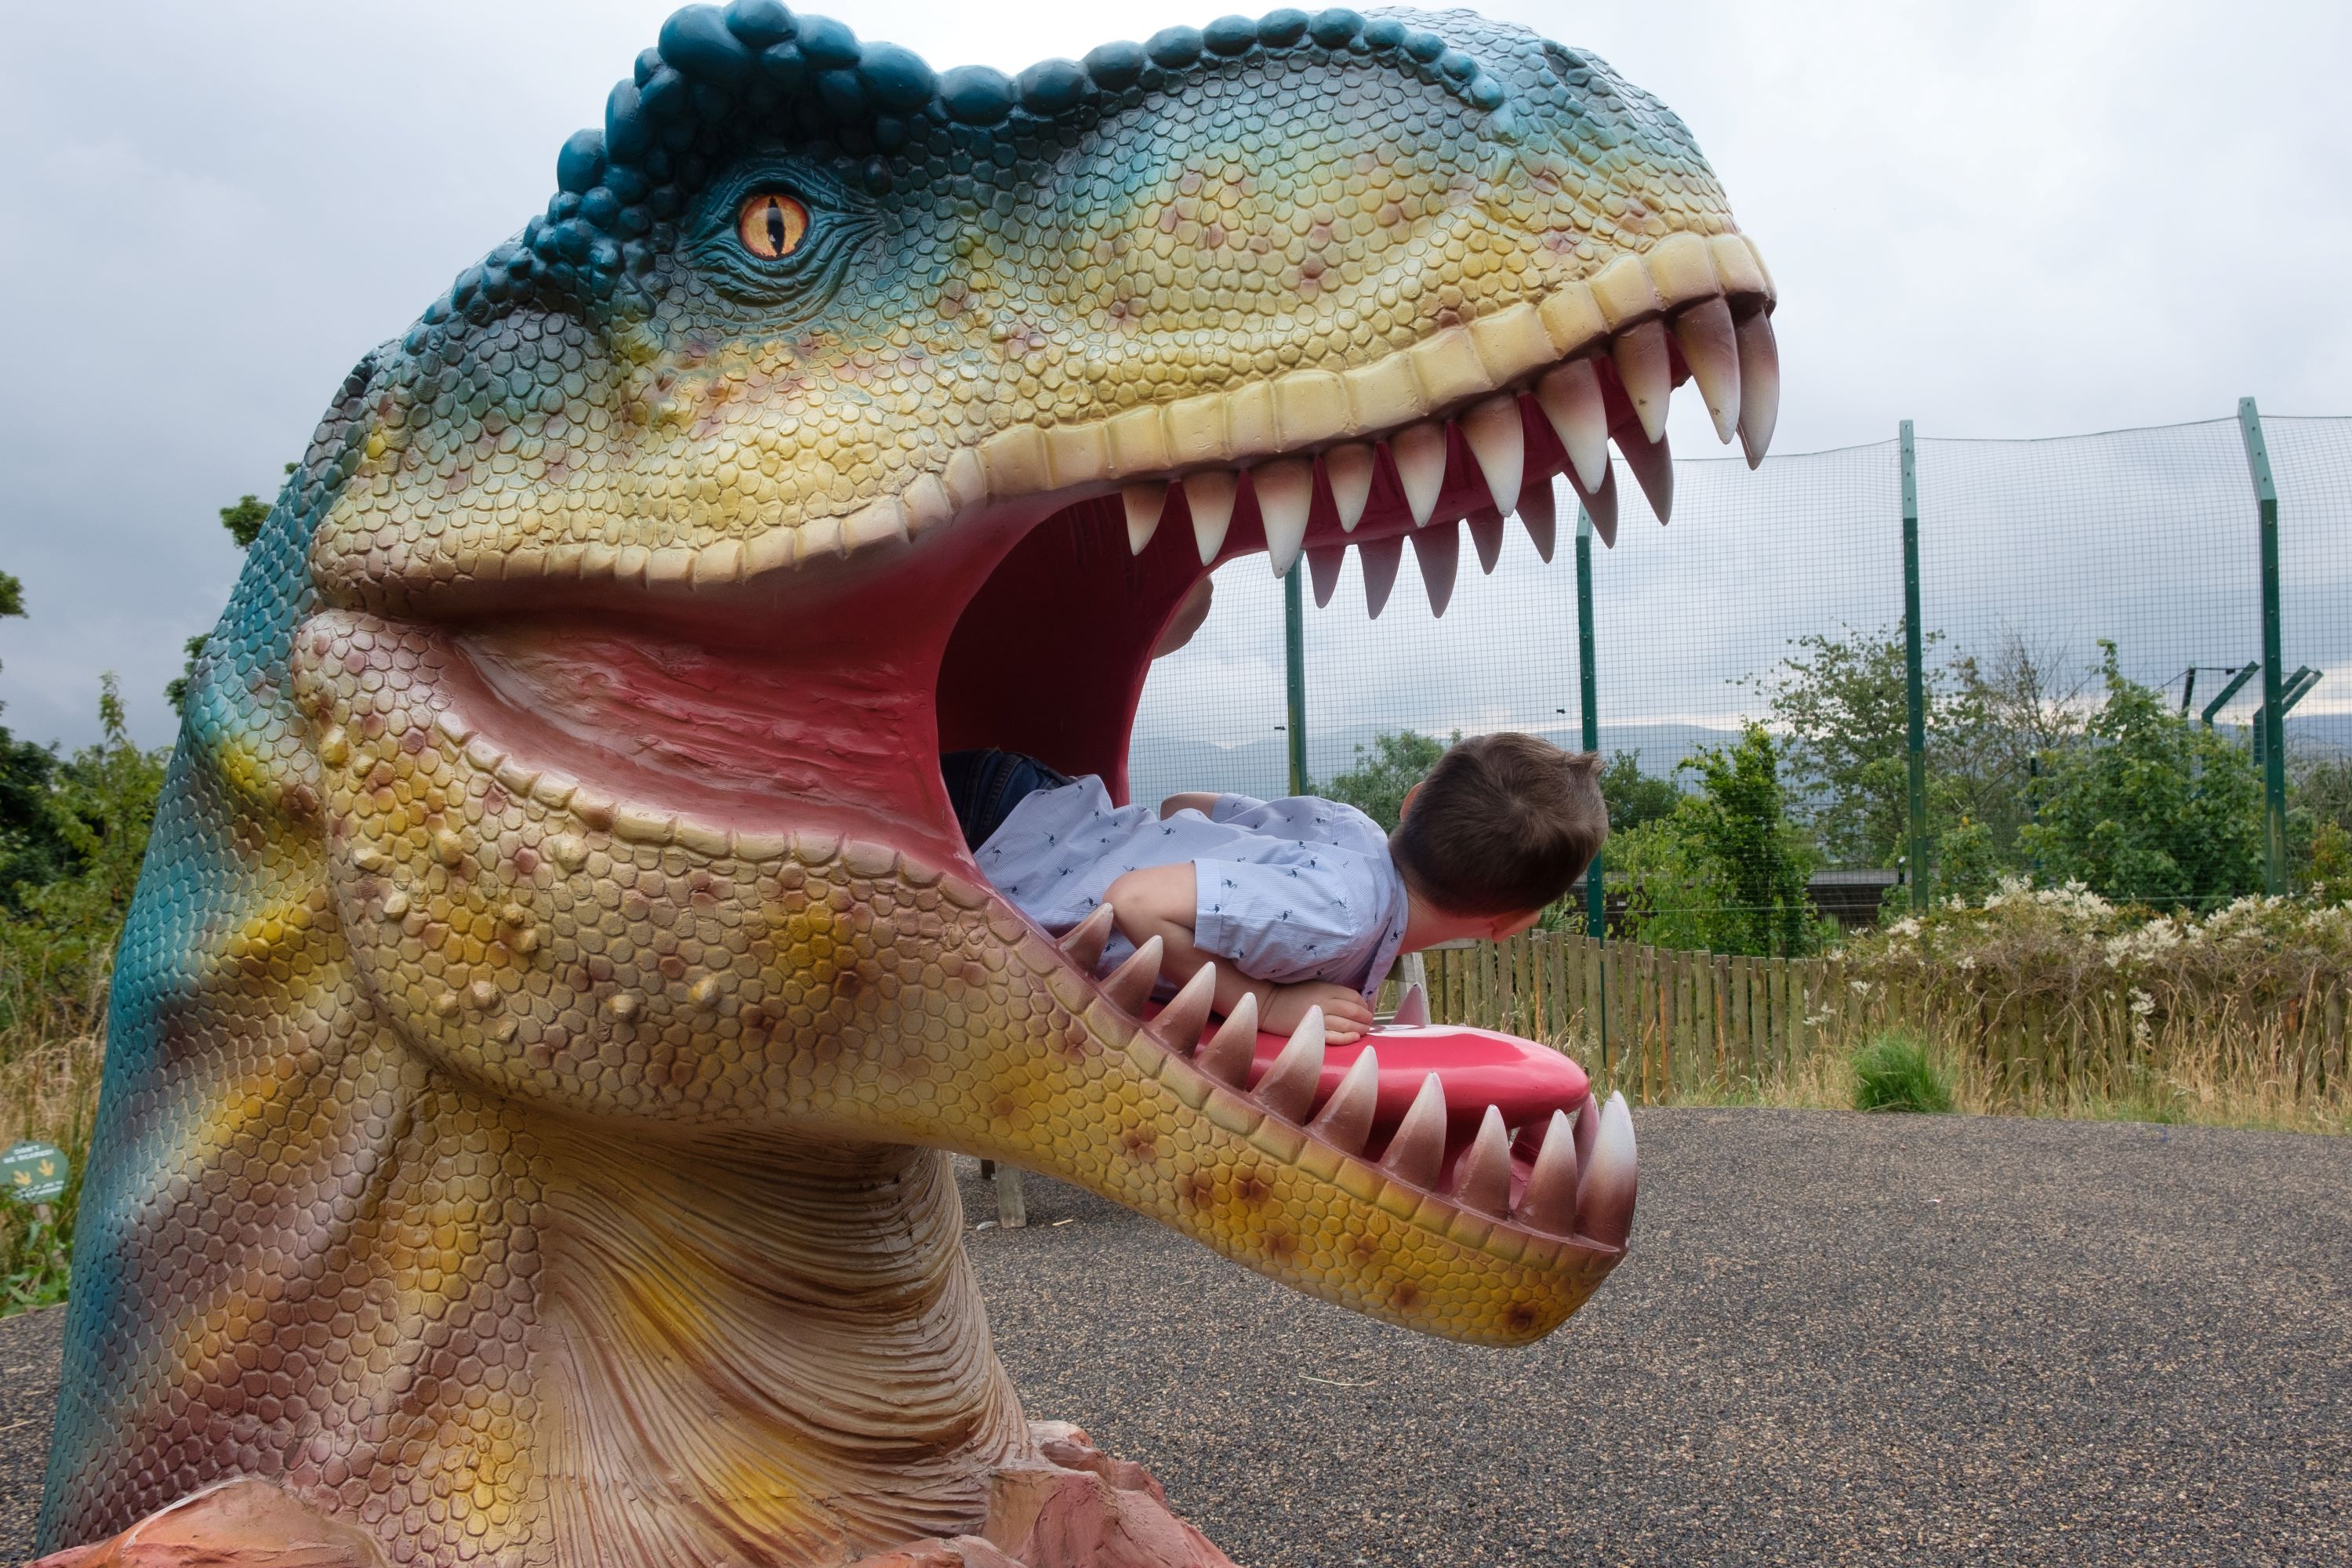 child peeking our of dinosaurs mouth IMAGE: Robin Mair 2022